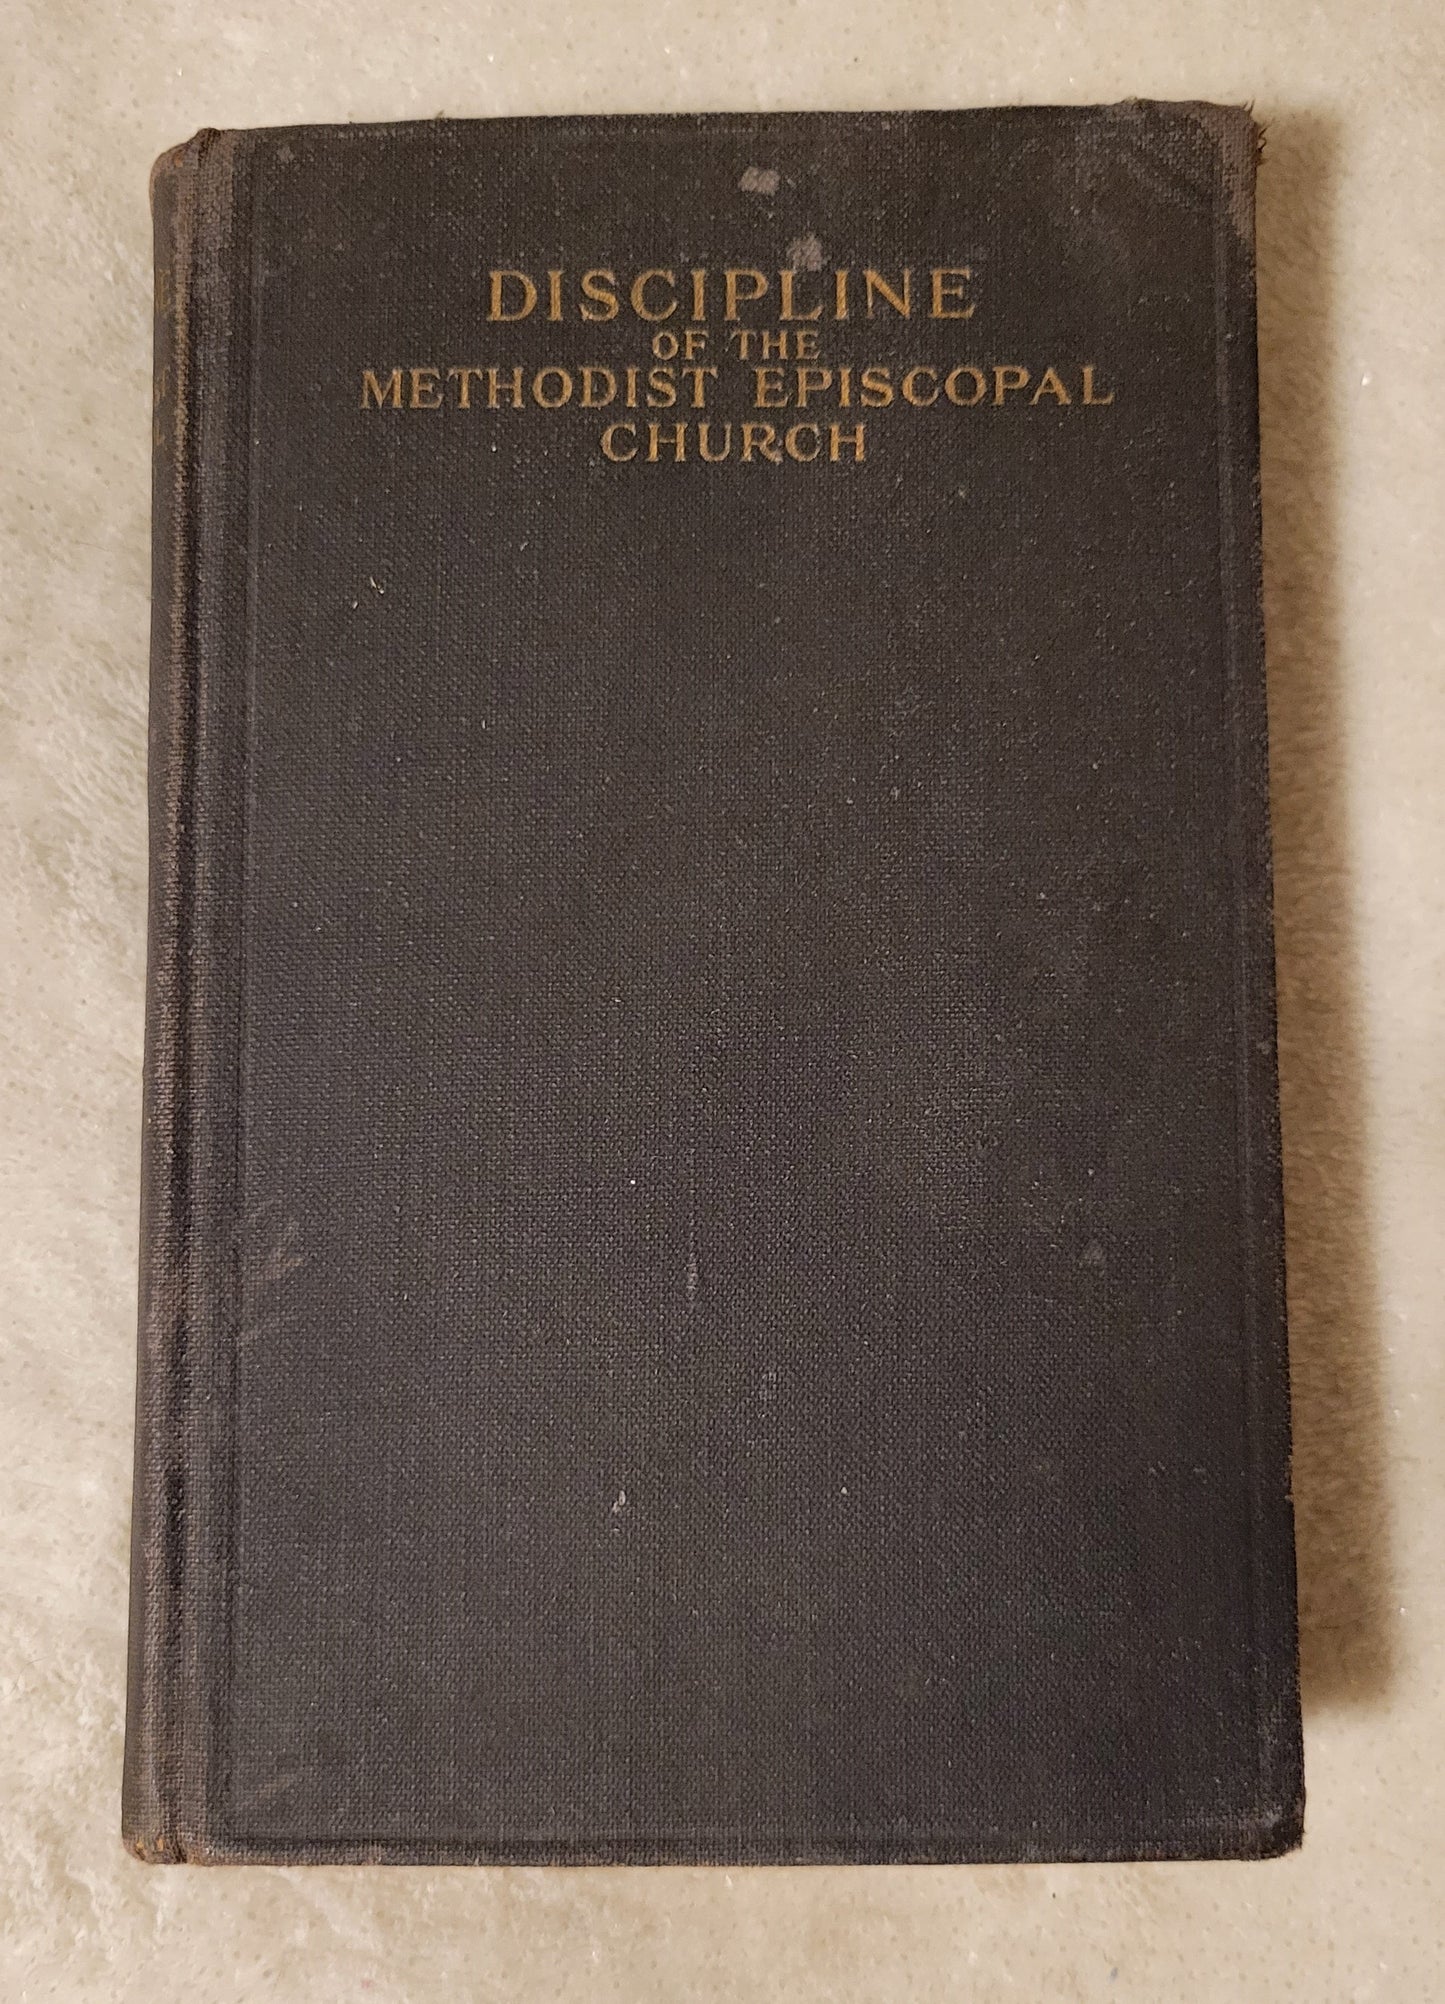 Antique book "Doctrines and Discipline of the Methodist Episcopal Church" published by the Methodist Book Concern, 1912. View of front cover.